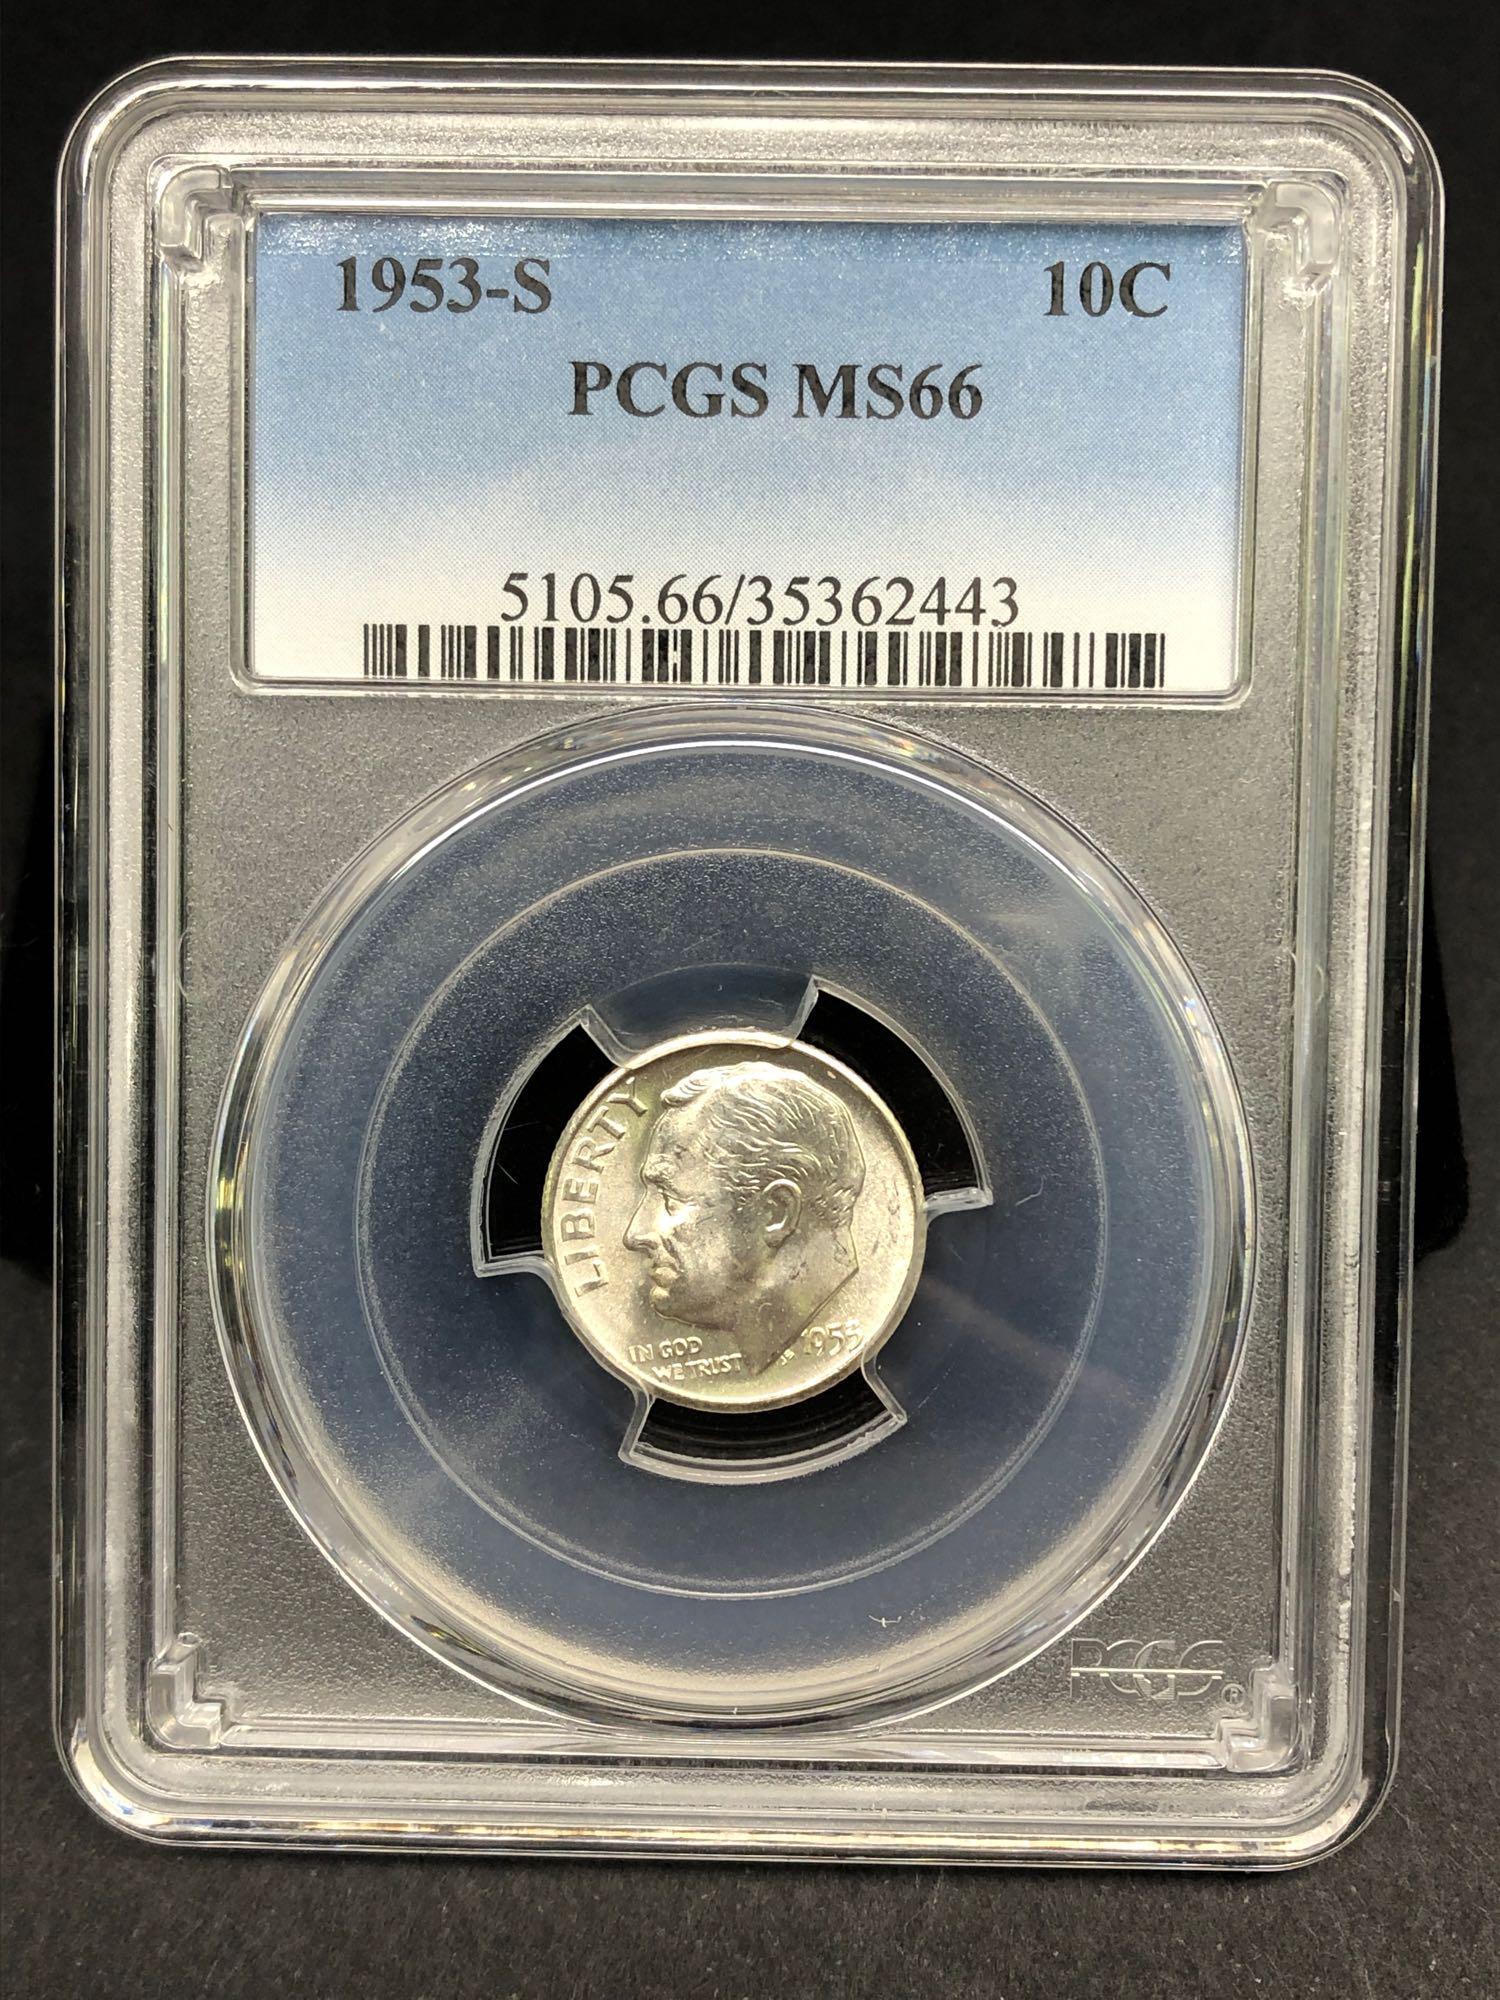 2 PCGS Certified MS-66 Roosevelt Dimes 1953-S